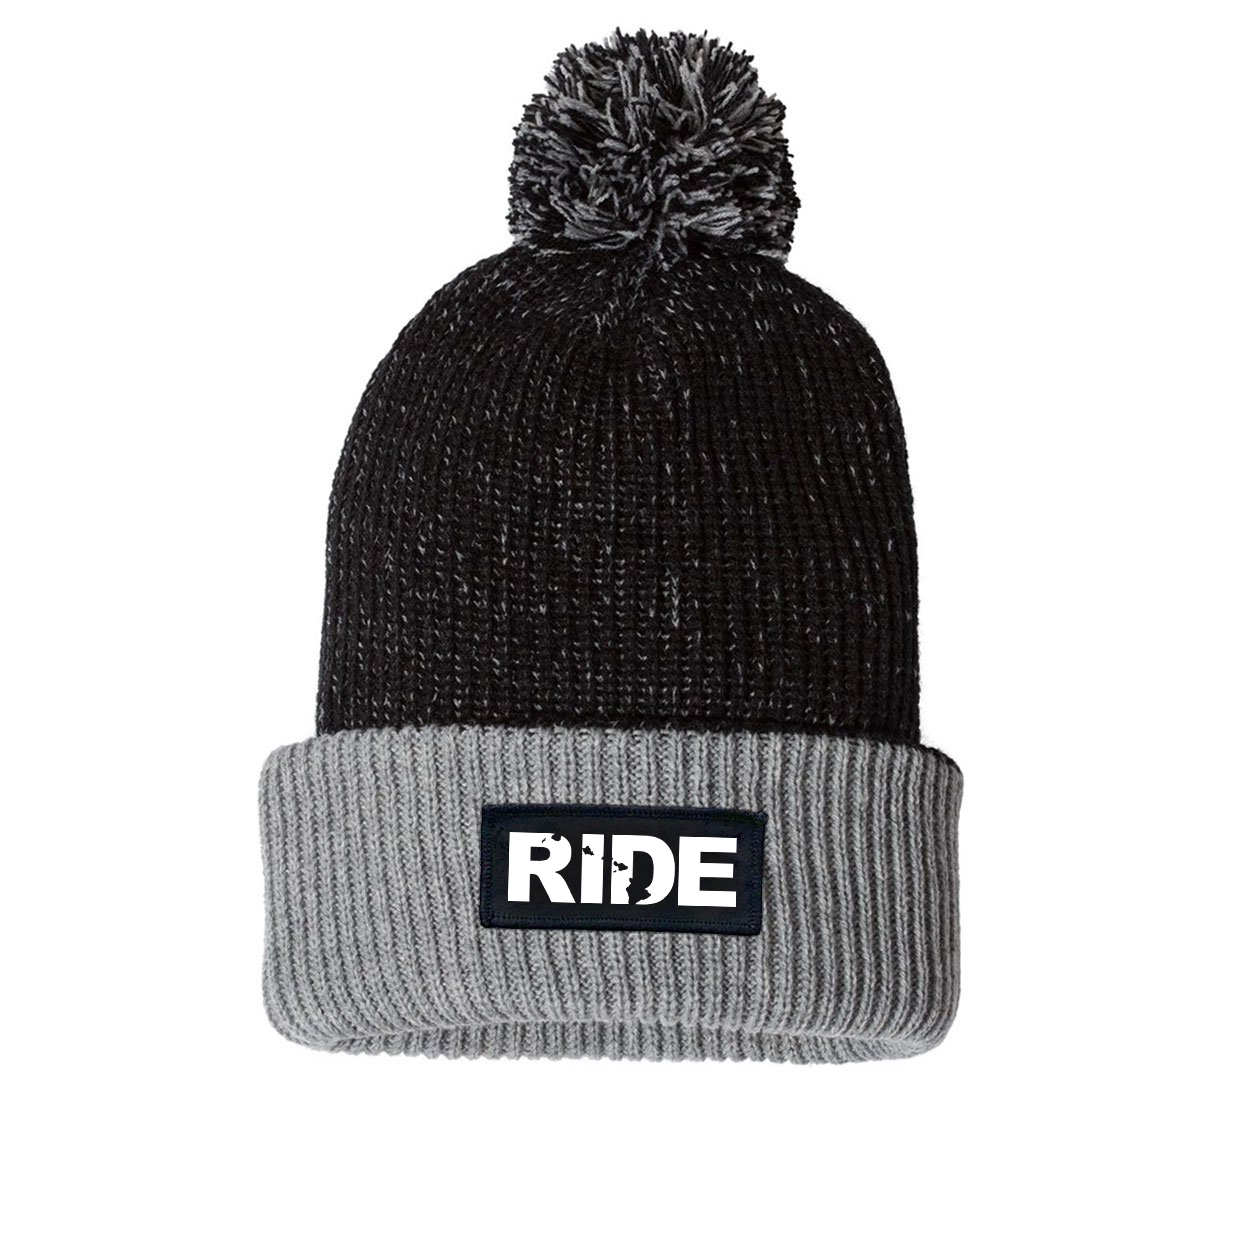 Ride Hawaii Night Out Woven Patch Roll Up Pom Knit Beanie Black/Gray (White Logo)